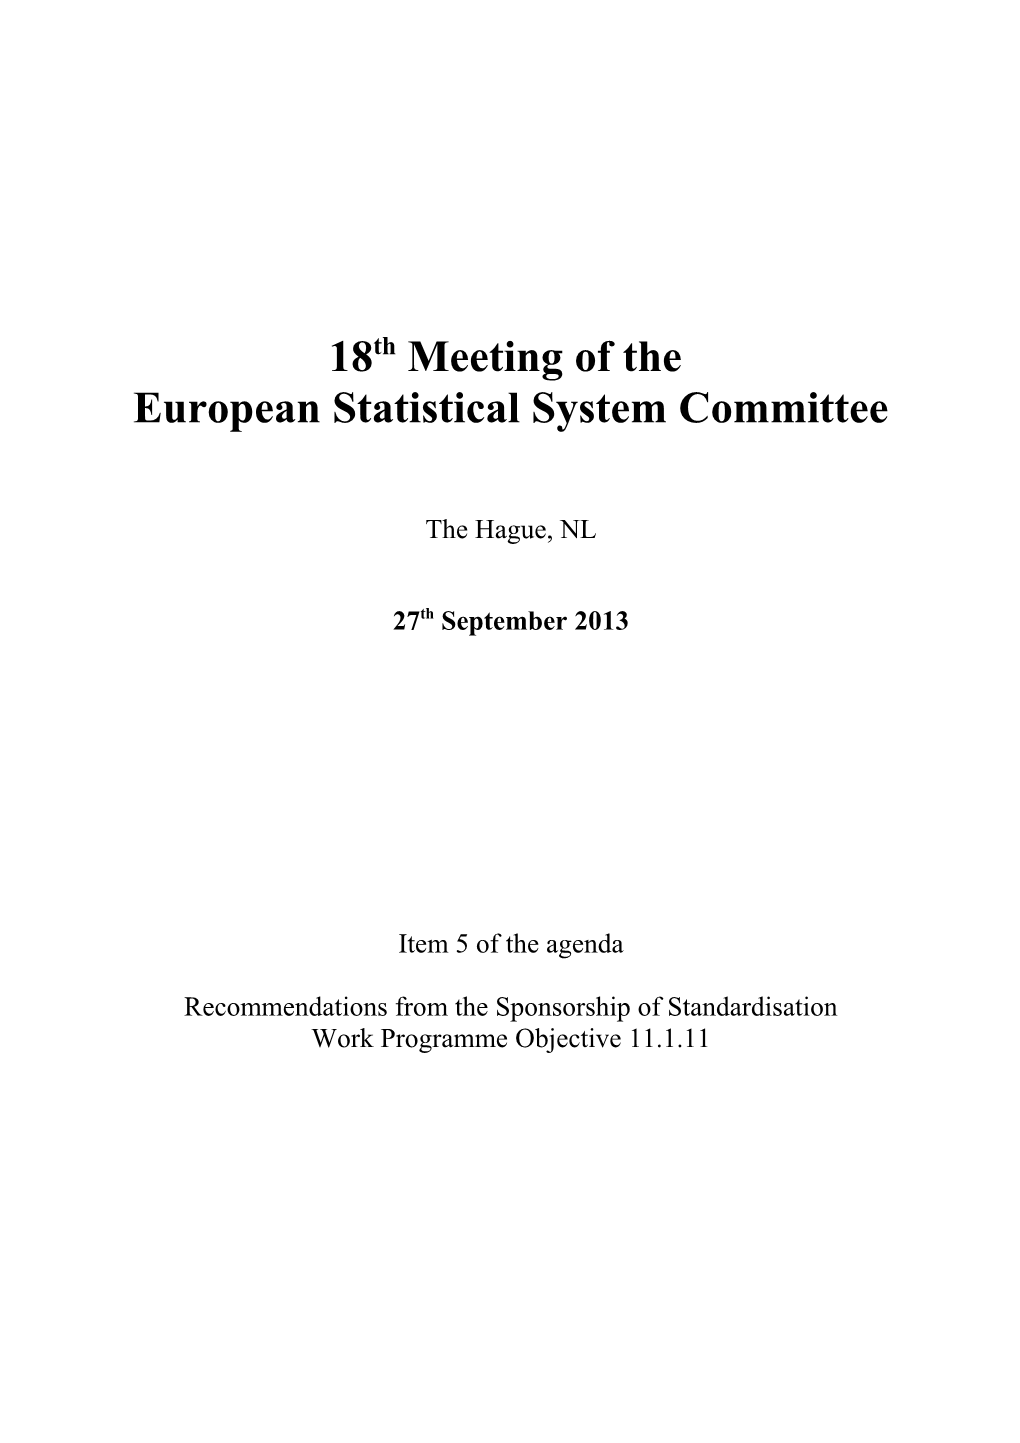 18Th Meeting of the European Statistical System Committee